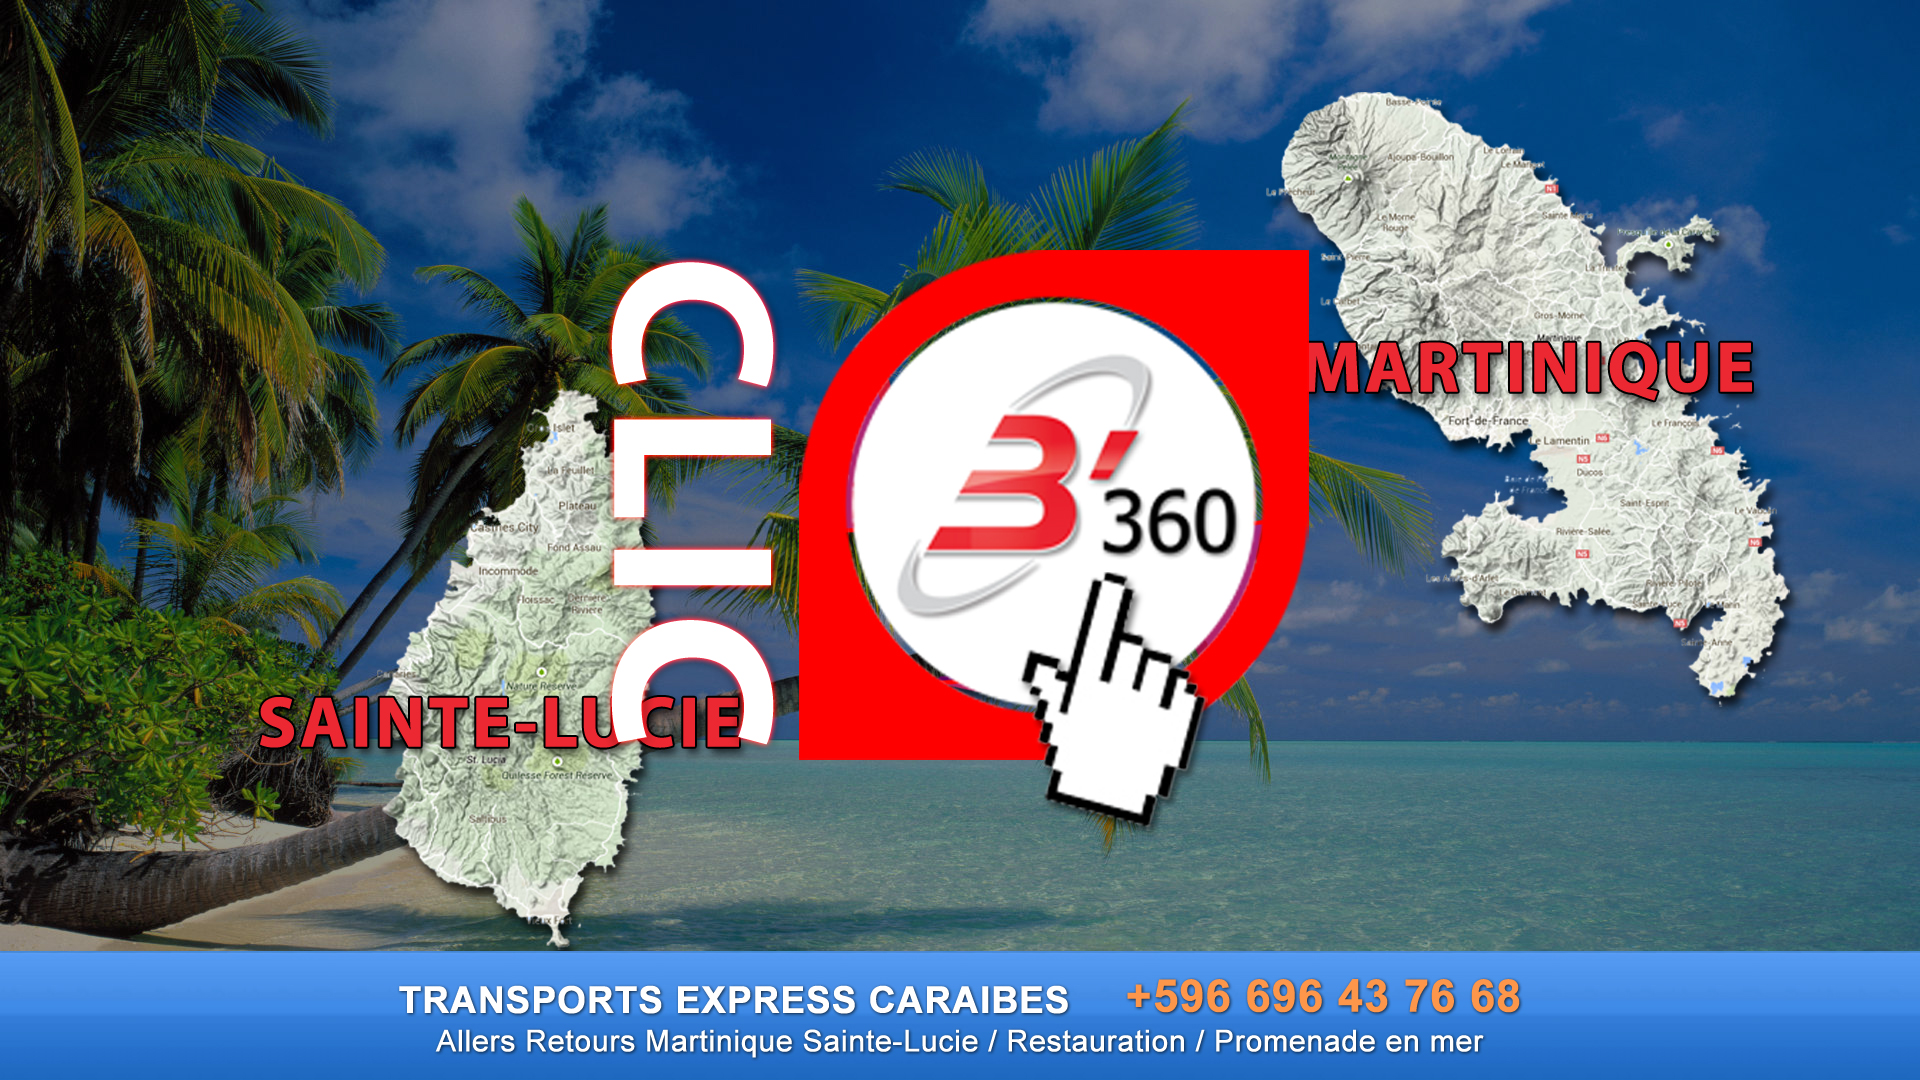 b360-be360-be-360-transports-express-caraibes-guyane-martinique-guadeloupe-sainte-lucie